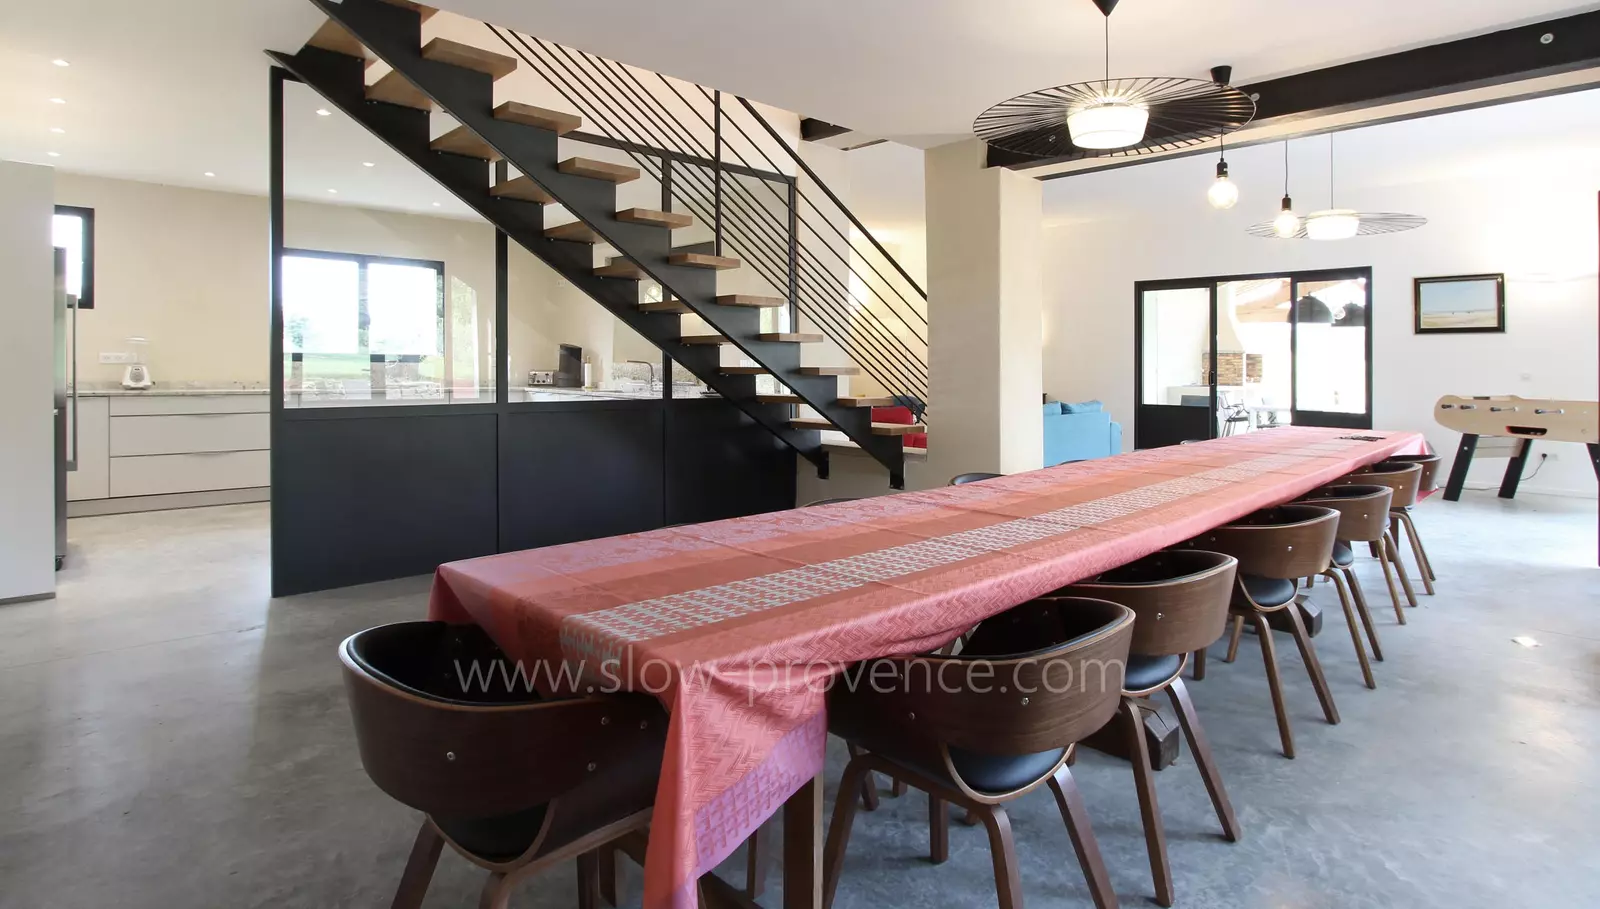 10-seats dining table